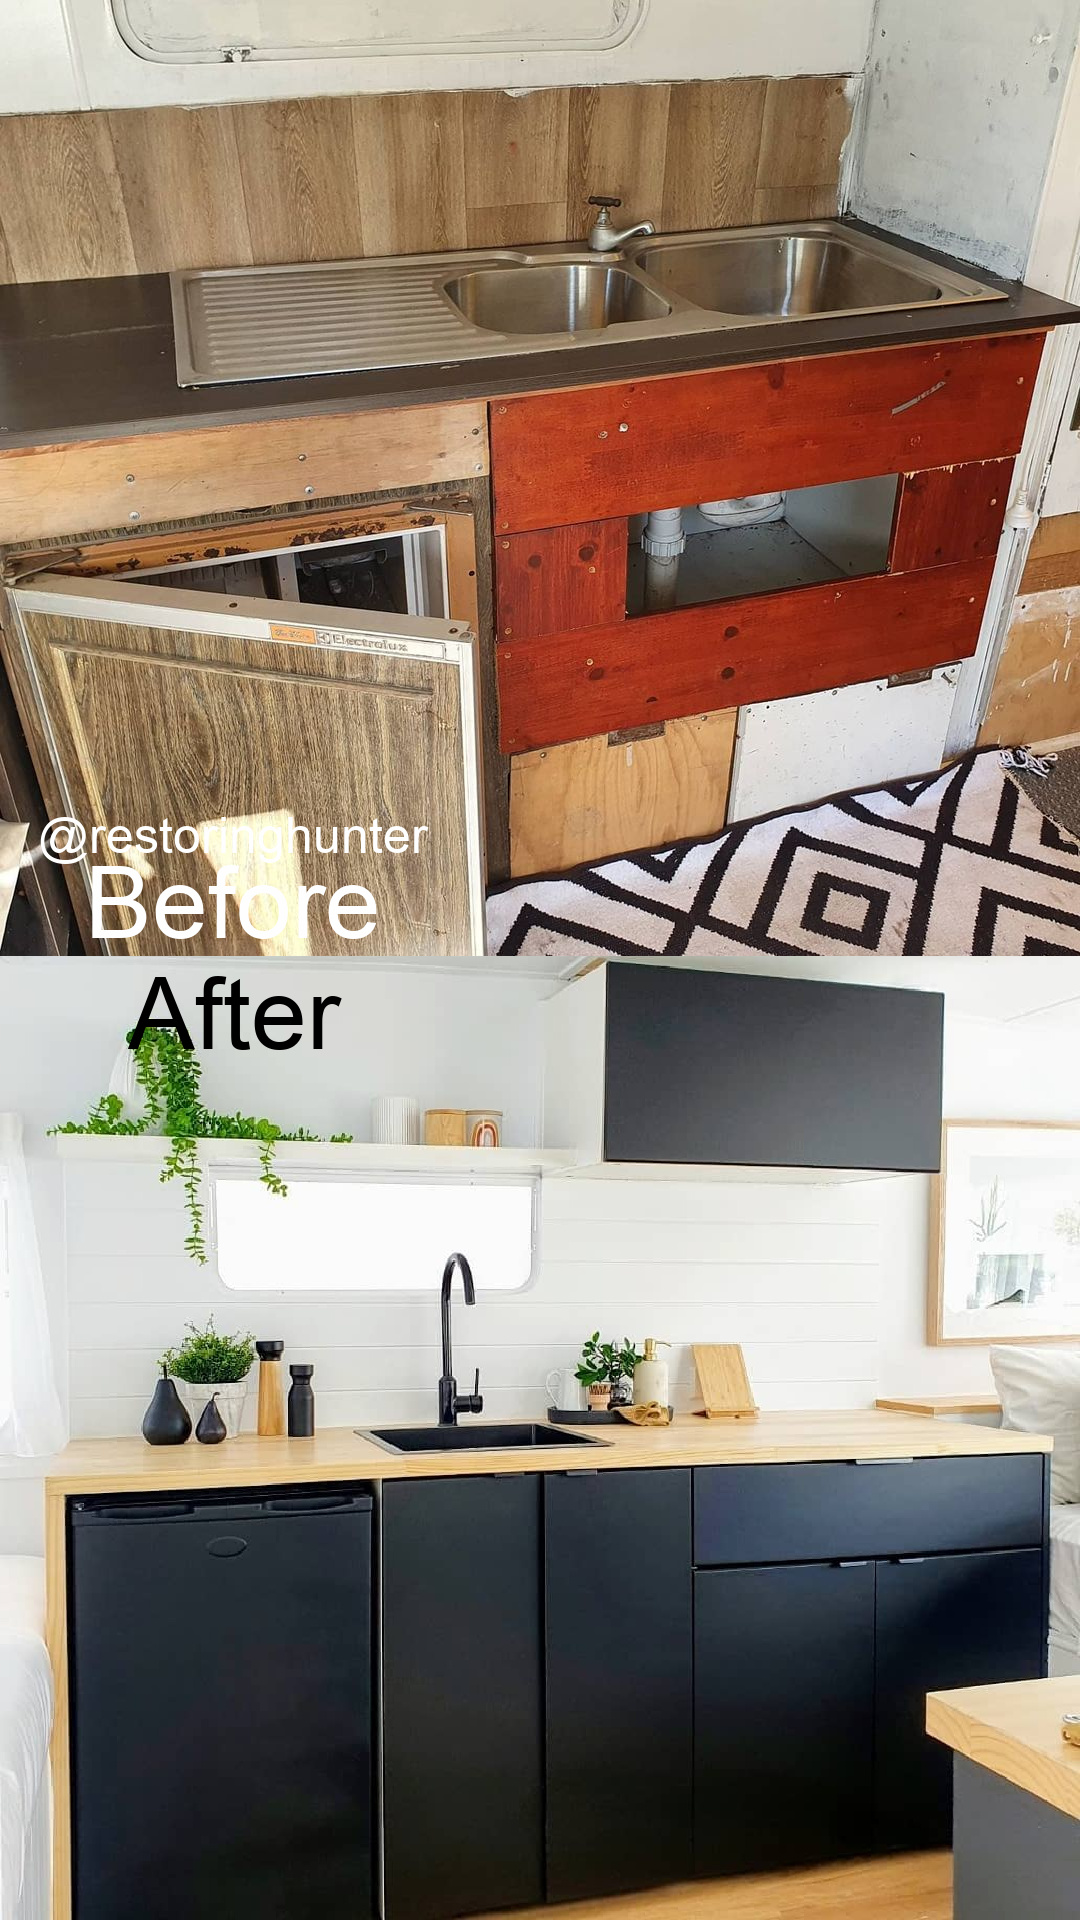 Before and after photos of the interior of a renovated vintage travel trailer.